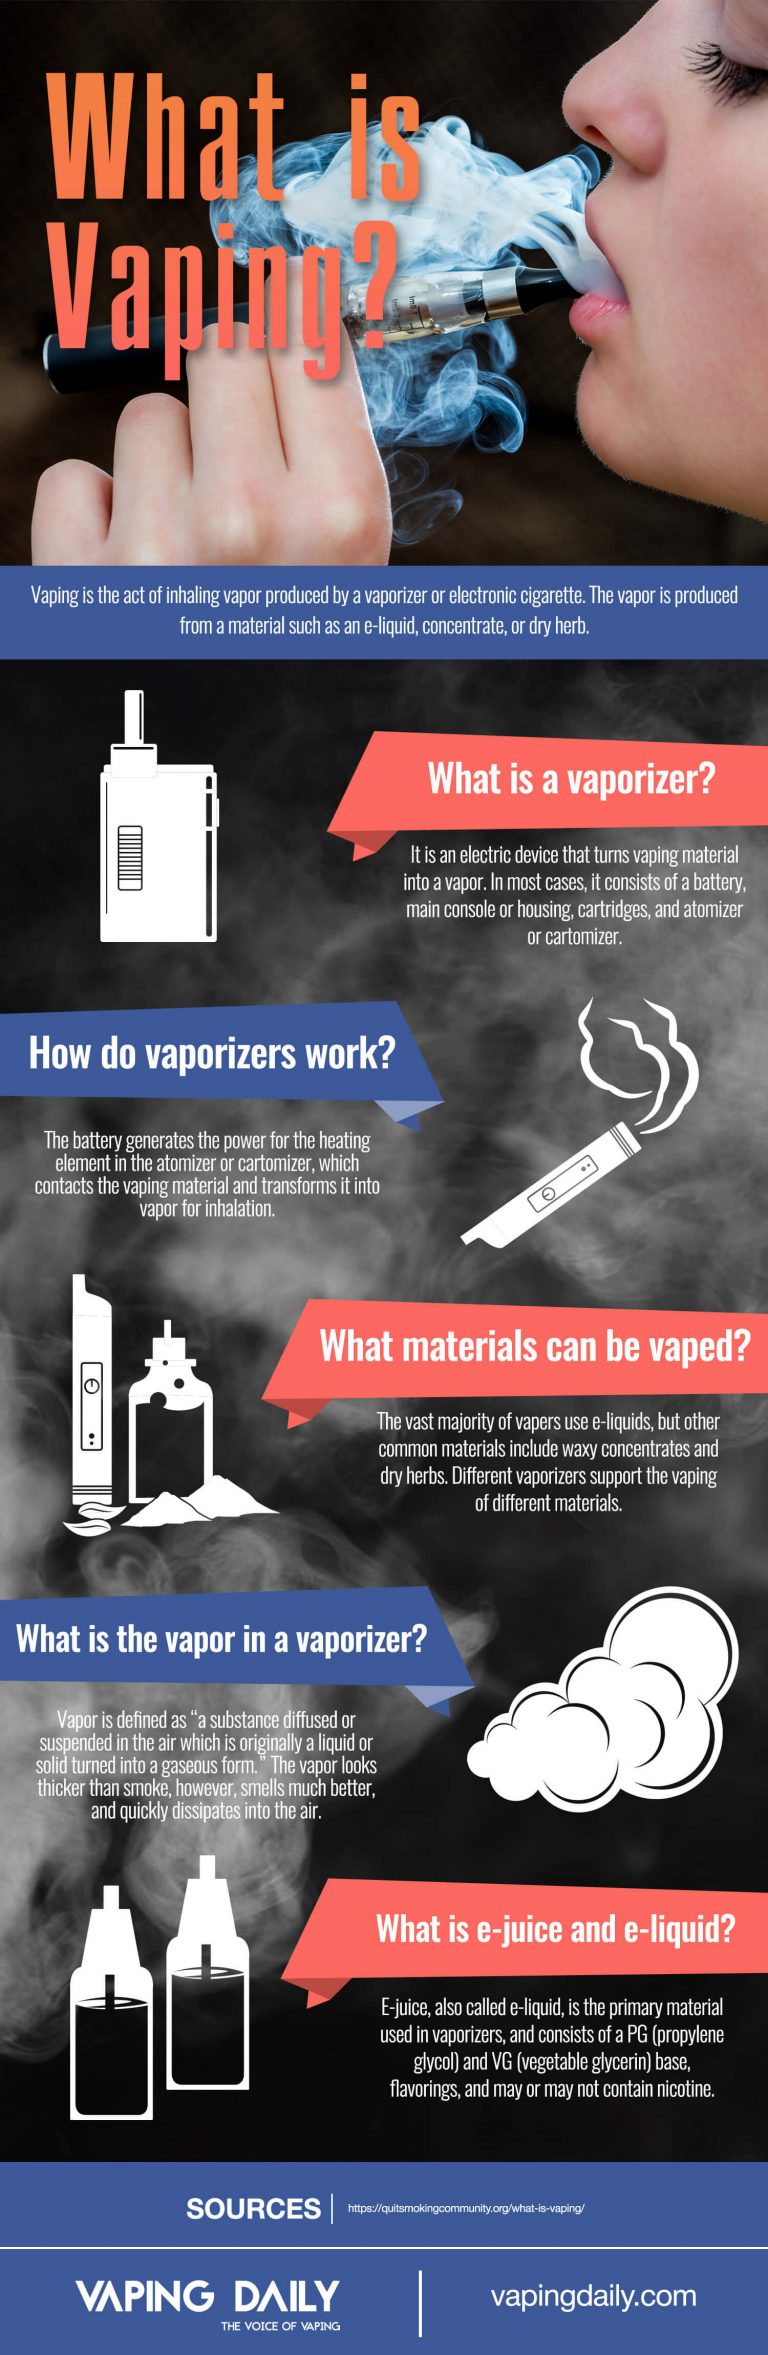 the latest research on vaping